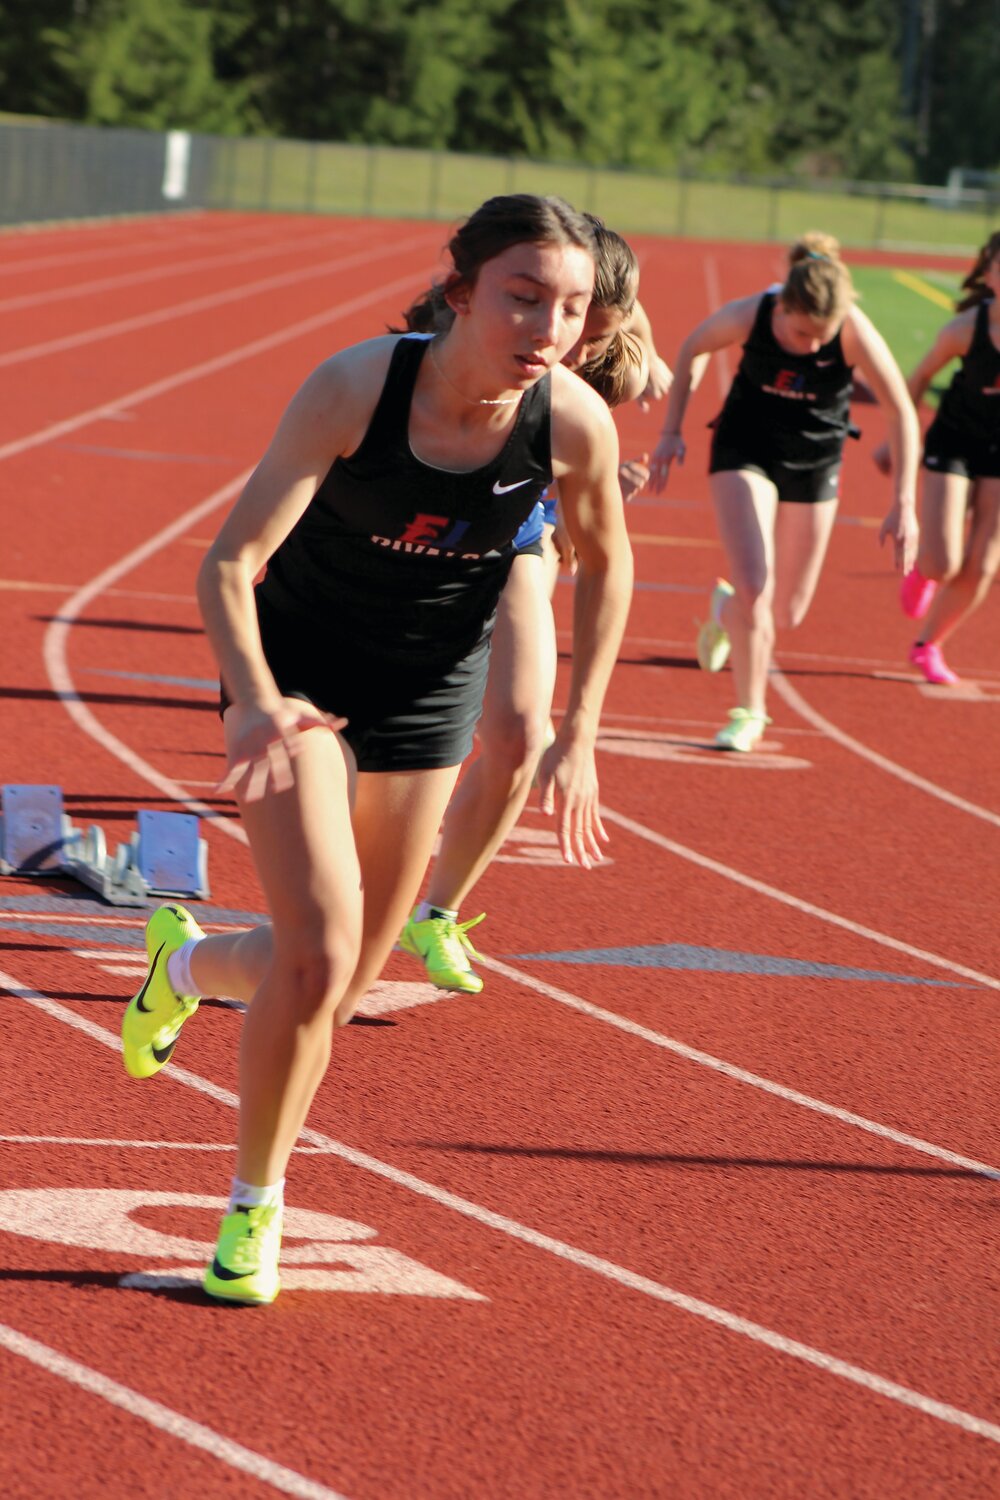 Rivals runner Kaylen Pray launches from the start of the 200-meter race in Silverdale.